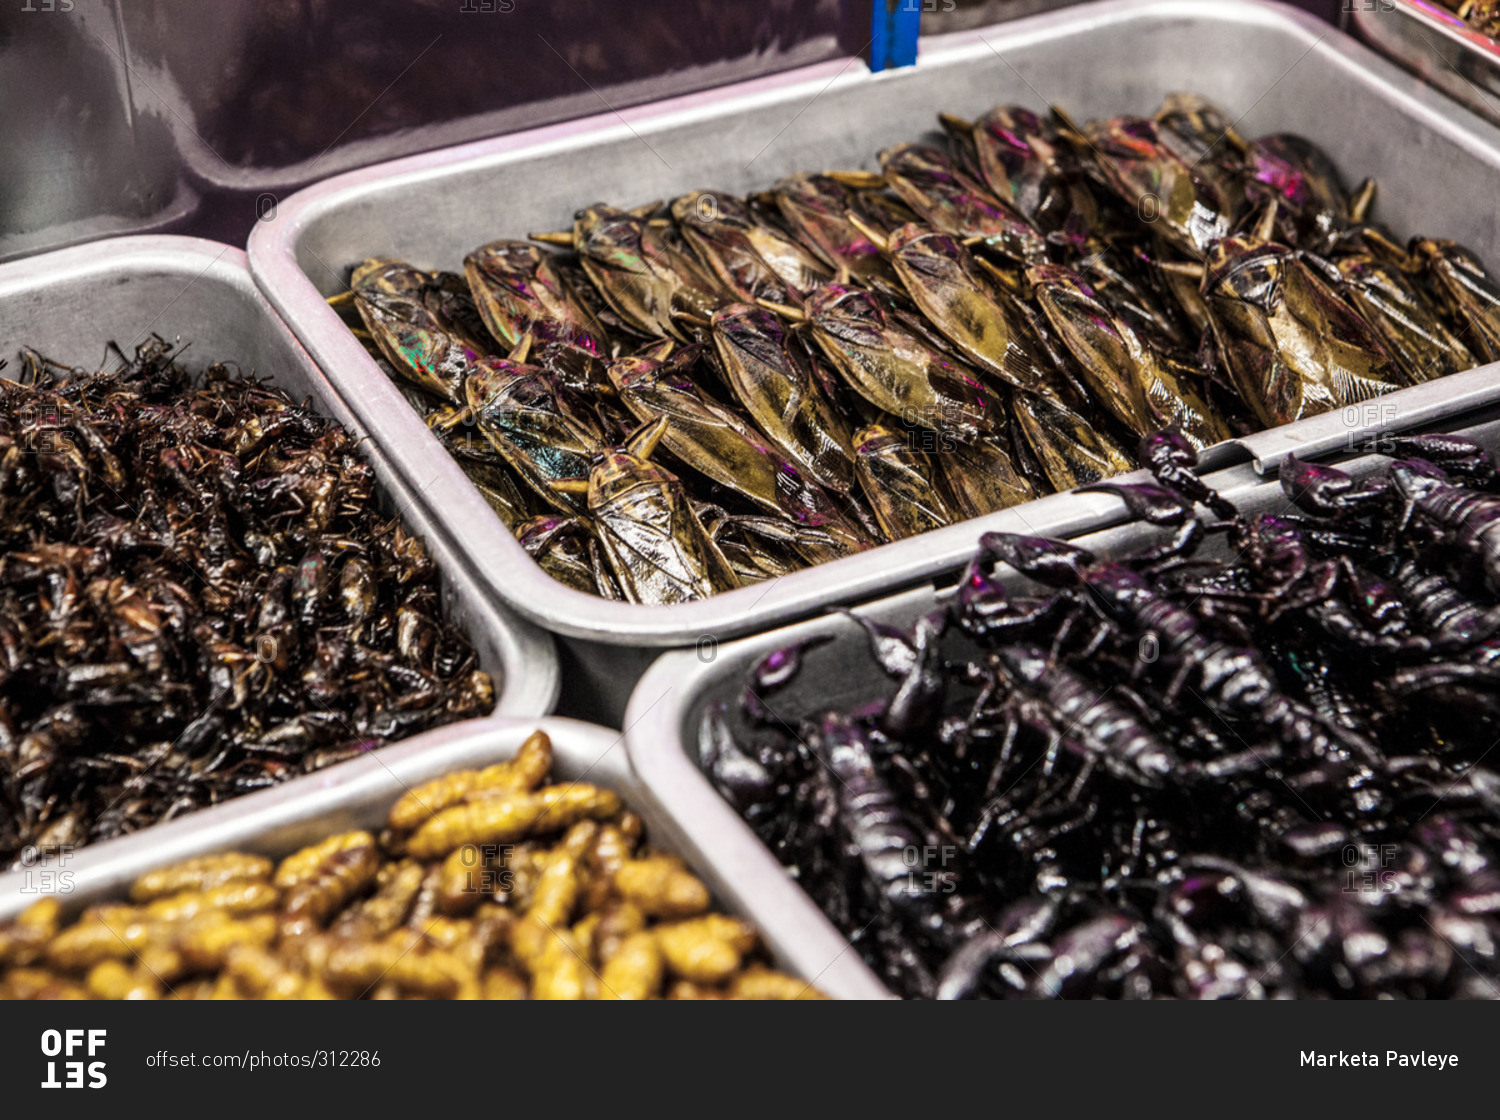 Trays of insects to eat